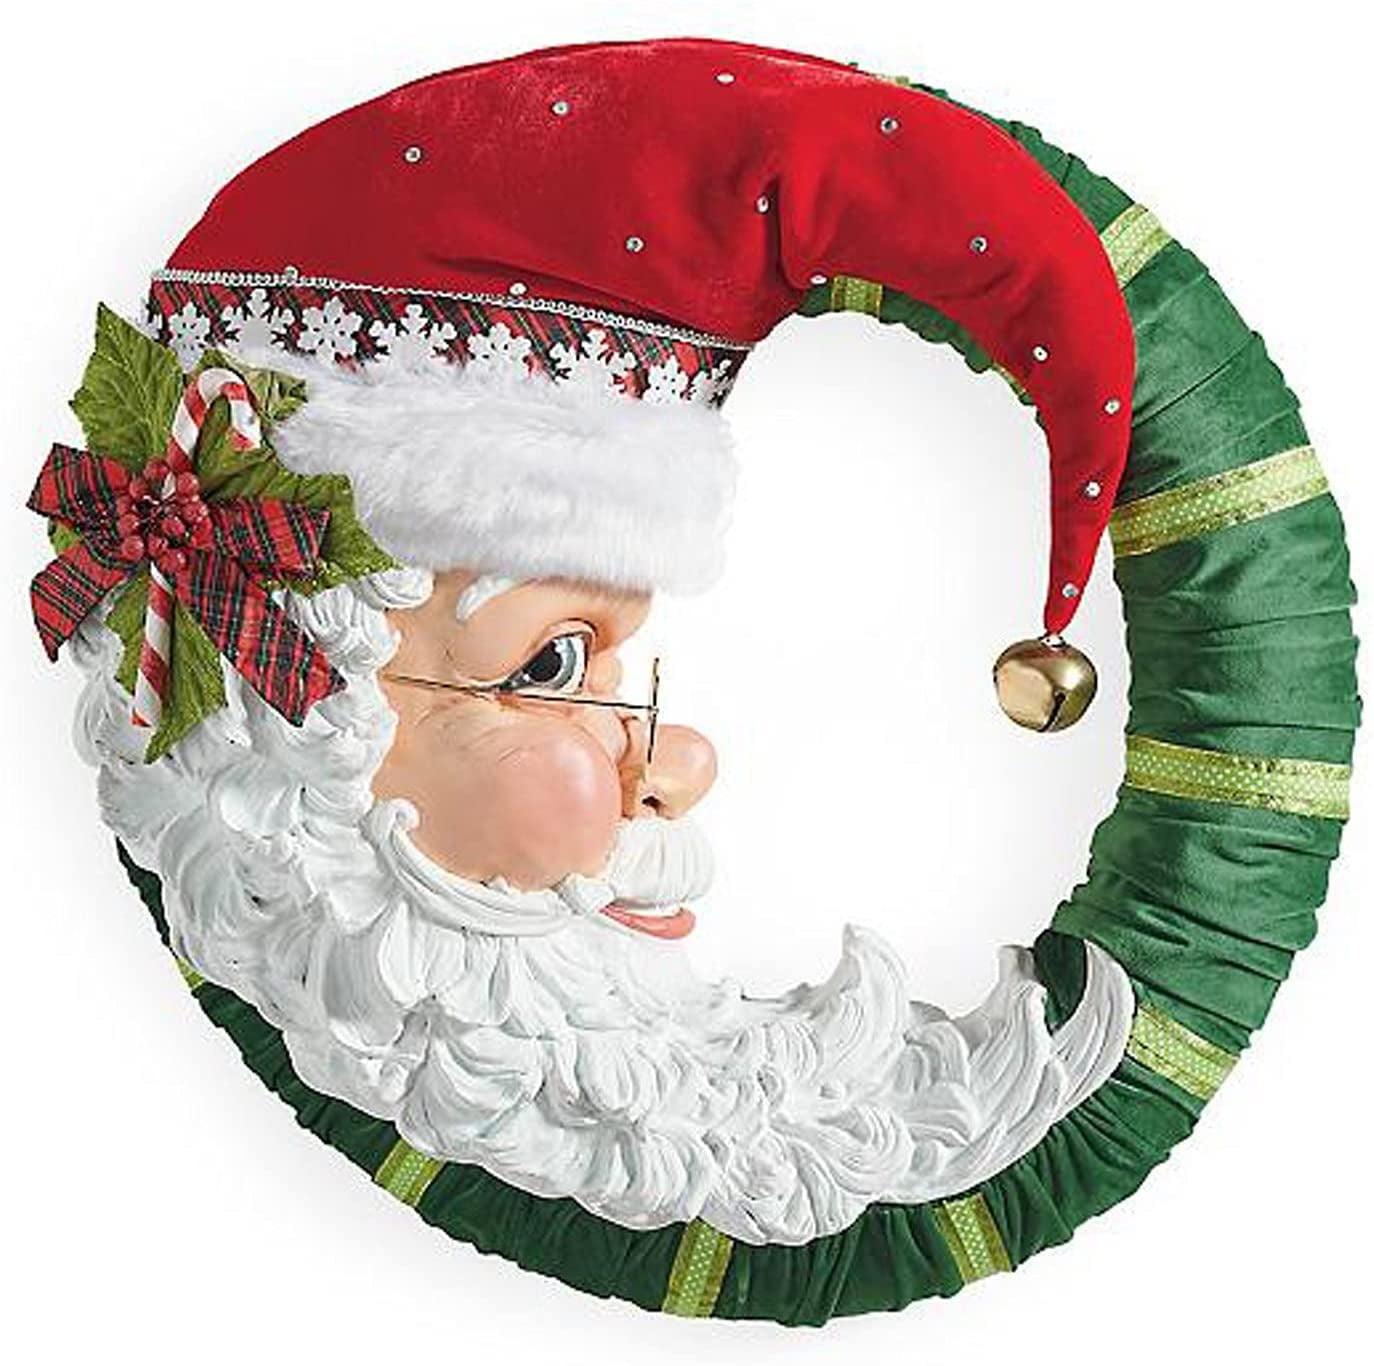 Classic Christmas Wreath Fancy Christmas Wreath Santa Christmas Wreath Christmas Wreath For Door or For Fireplace